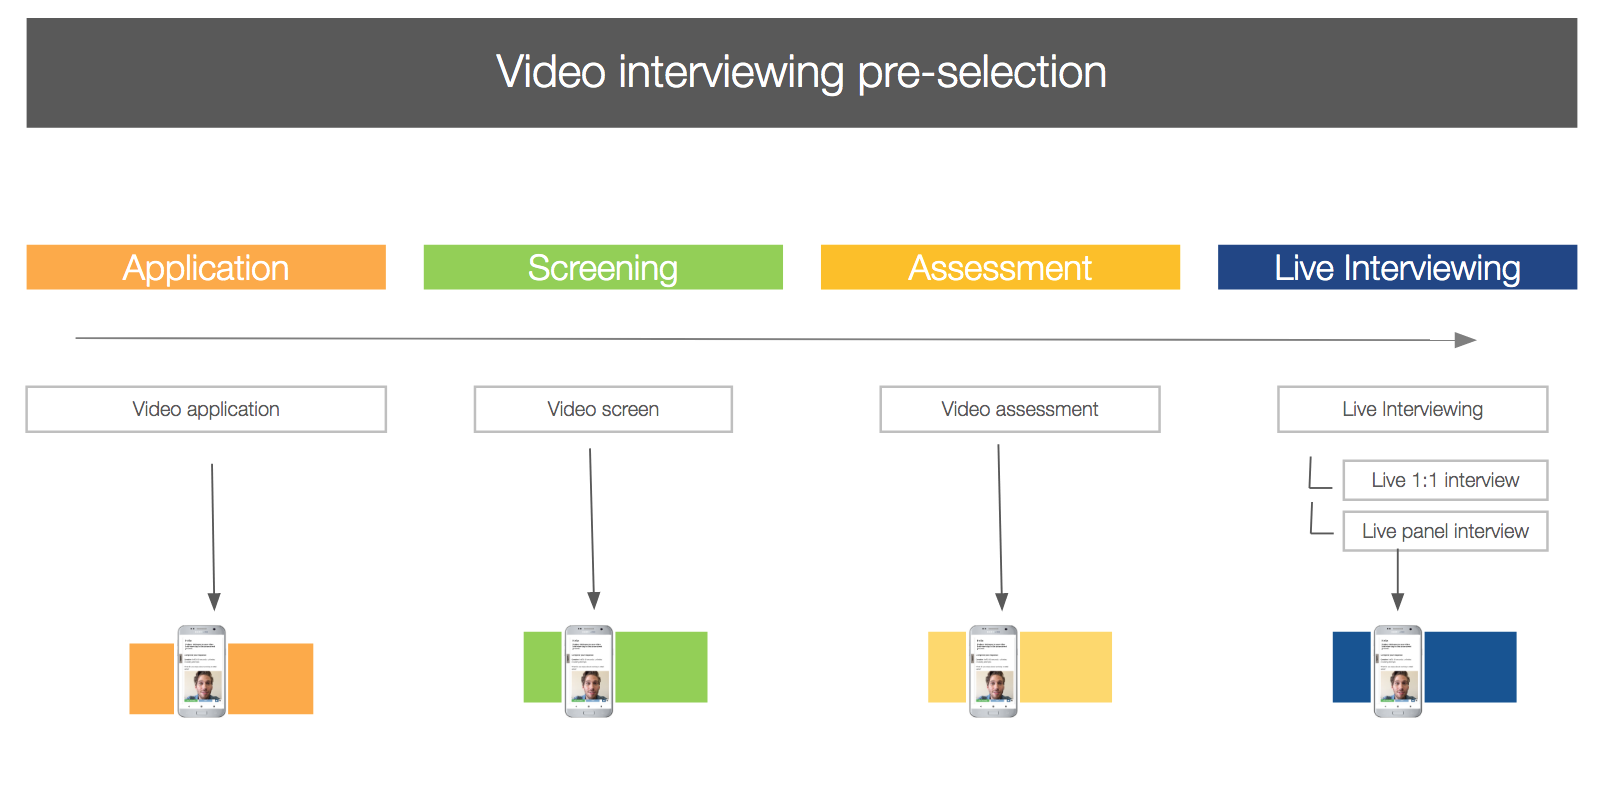 Video interviewing